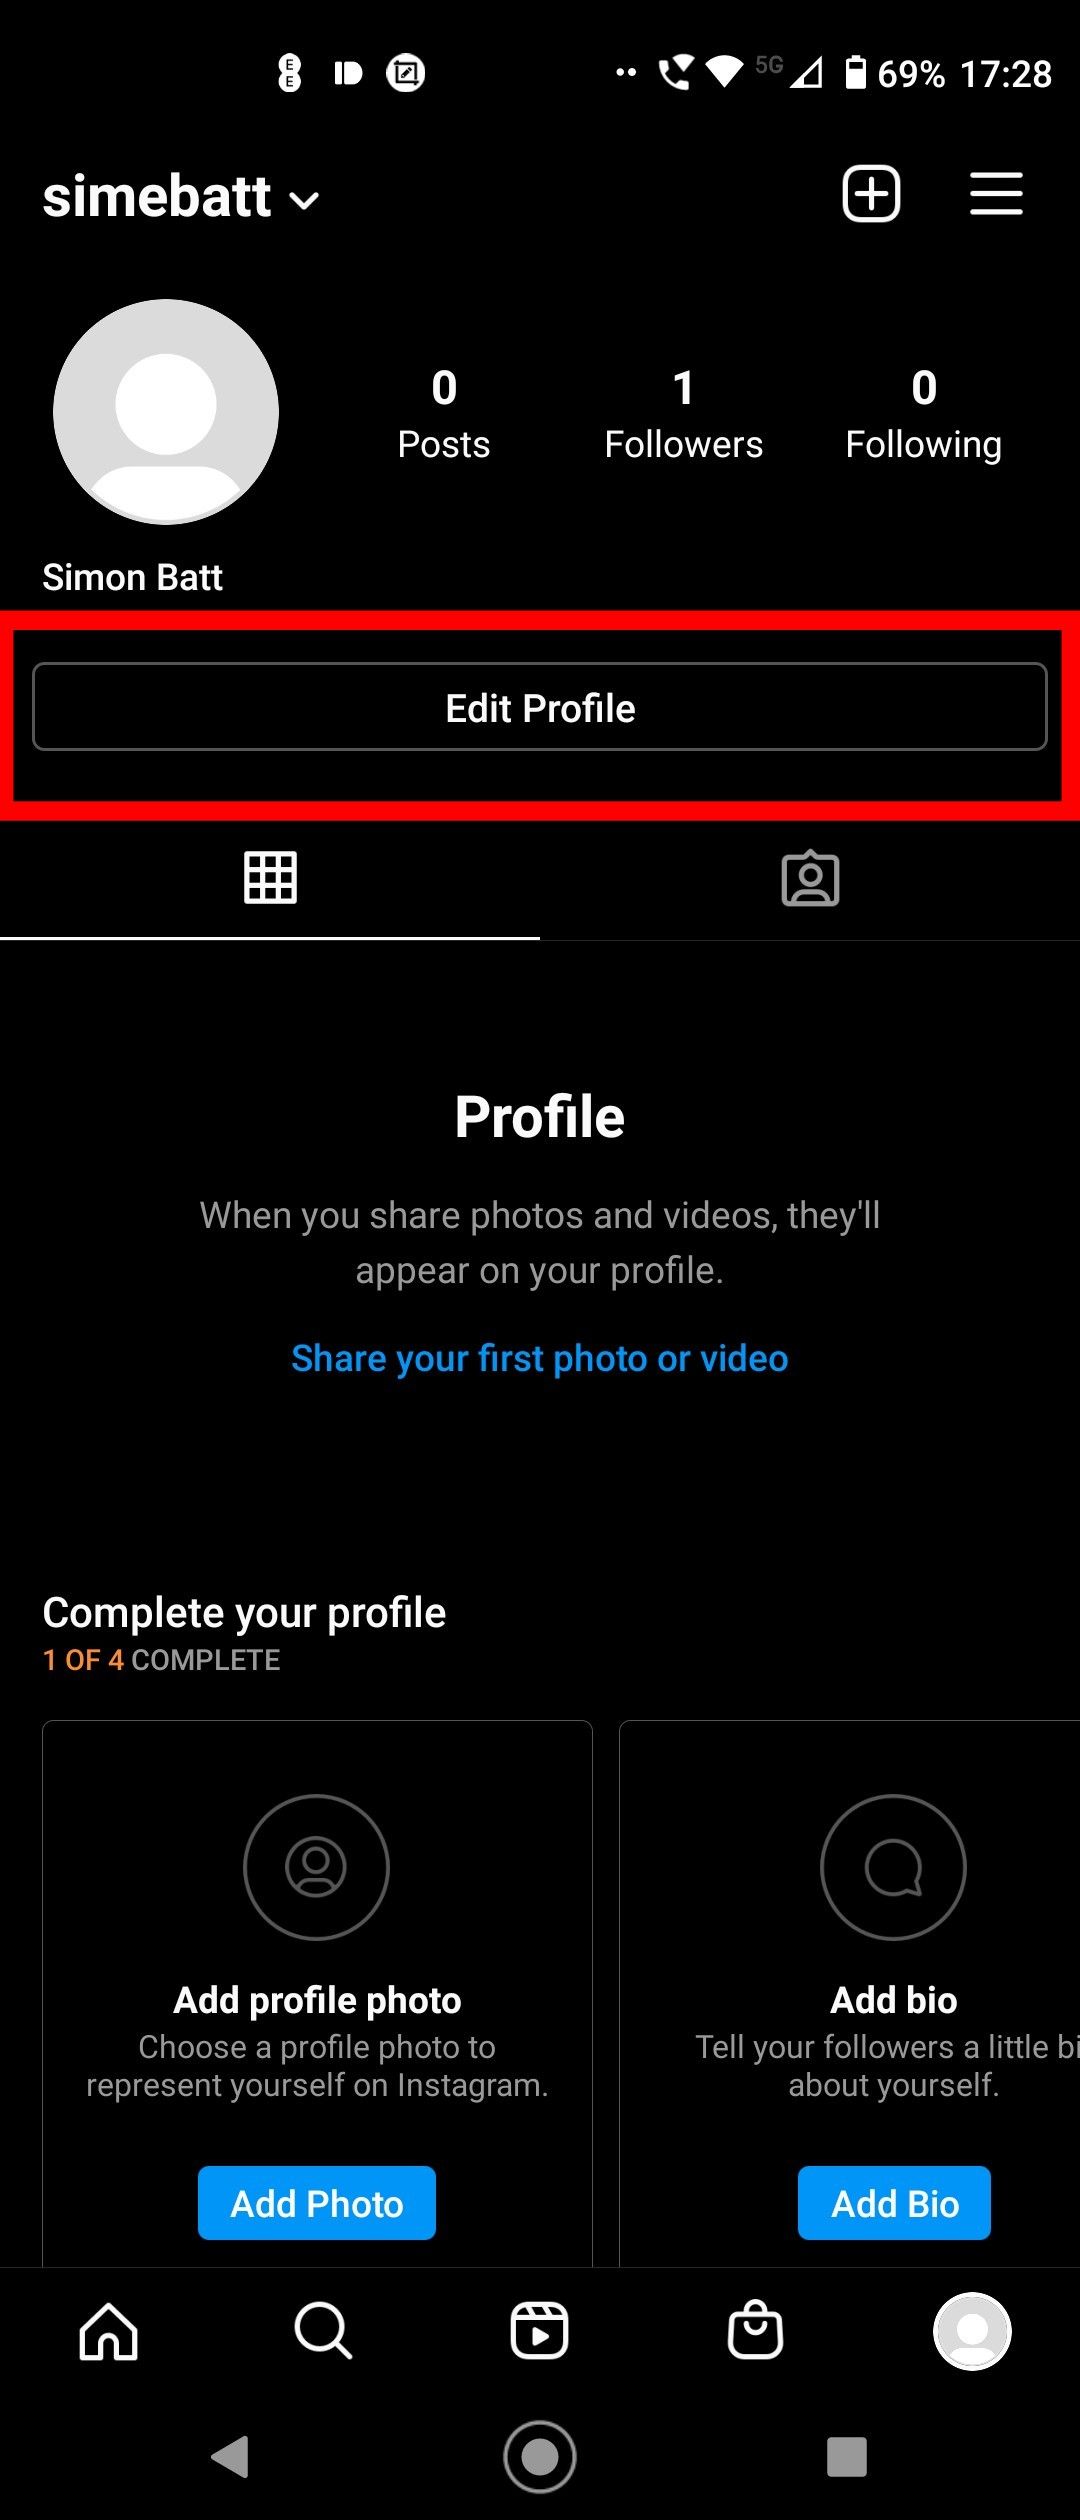 Editing your profile in the Instagram app